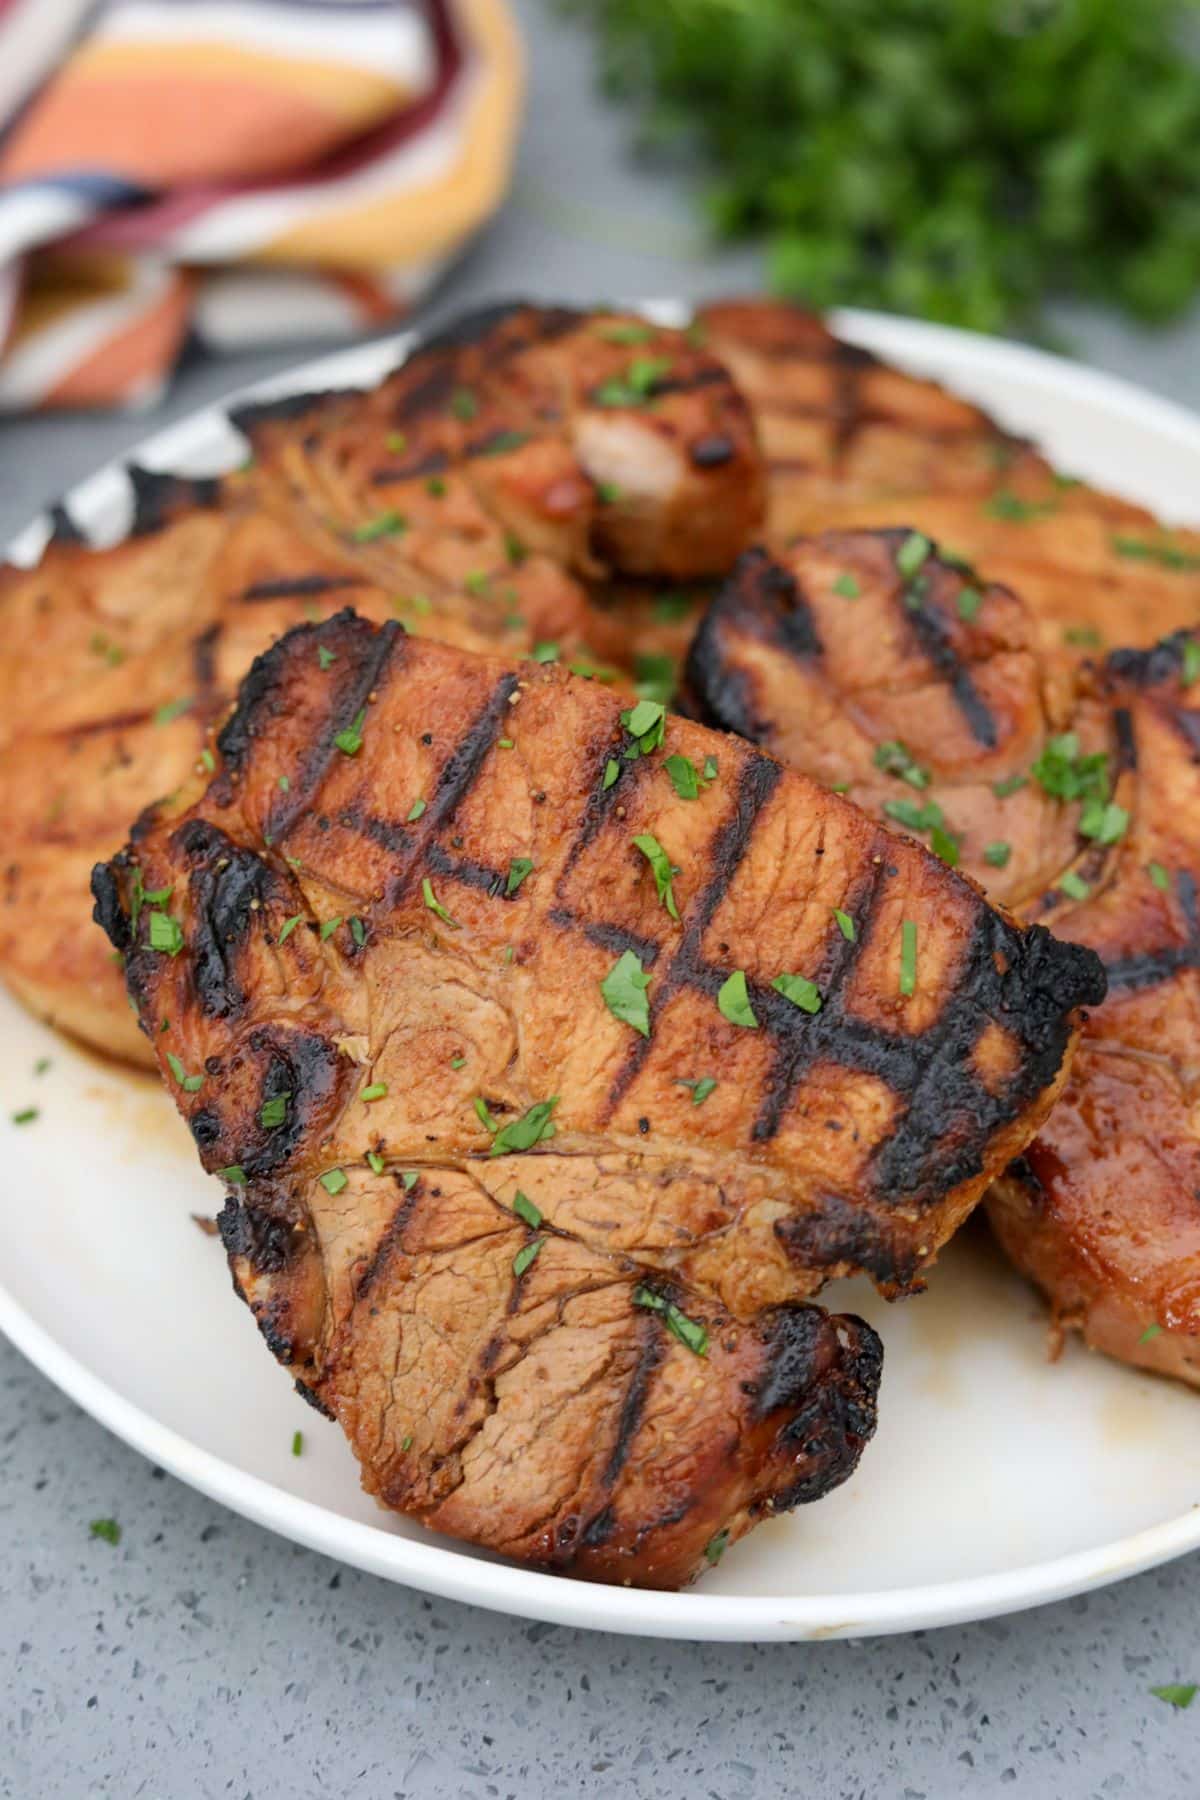 A plate of grilled pork chops